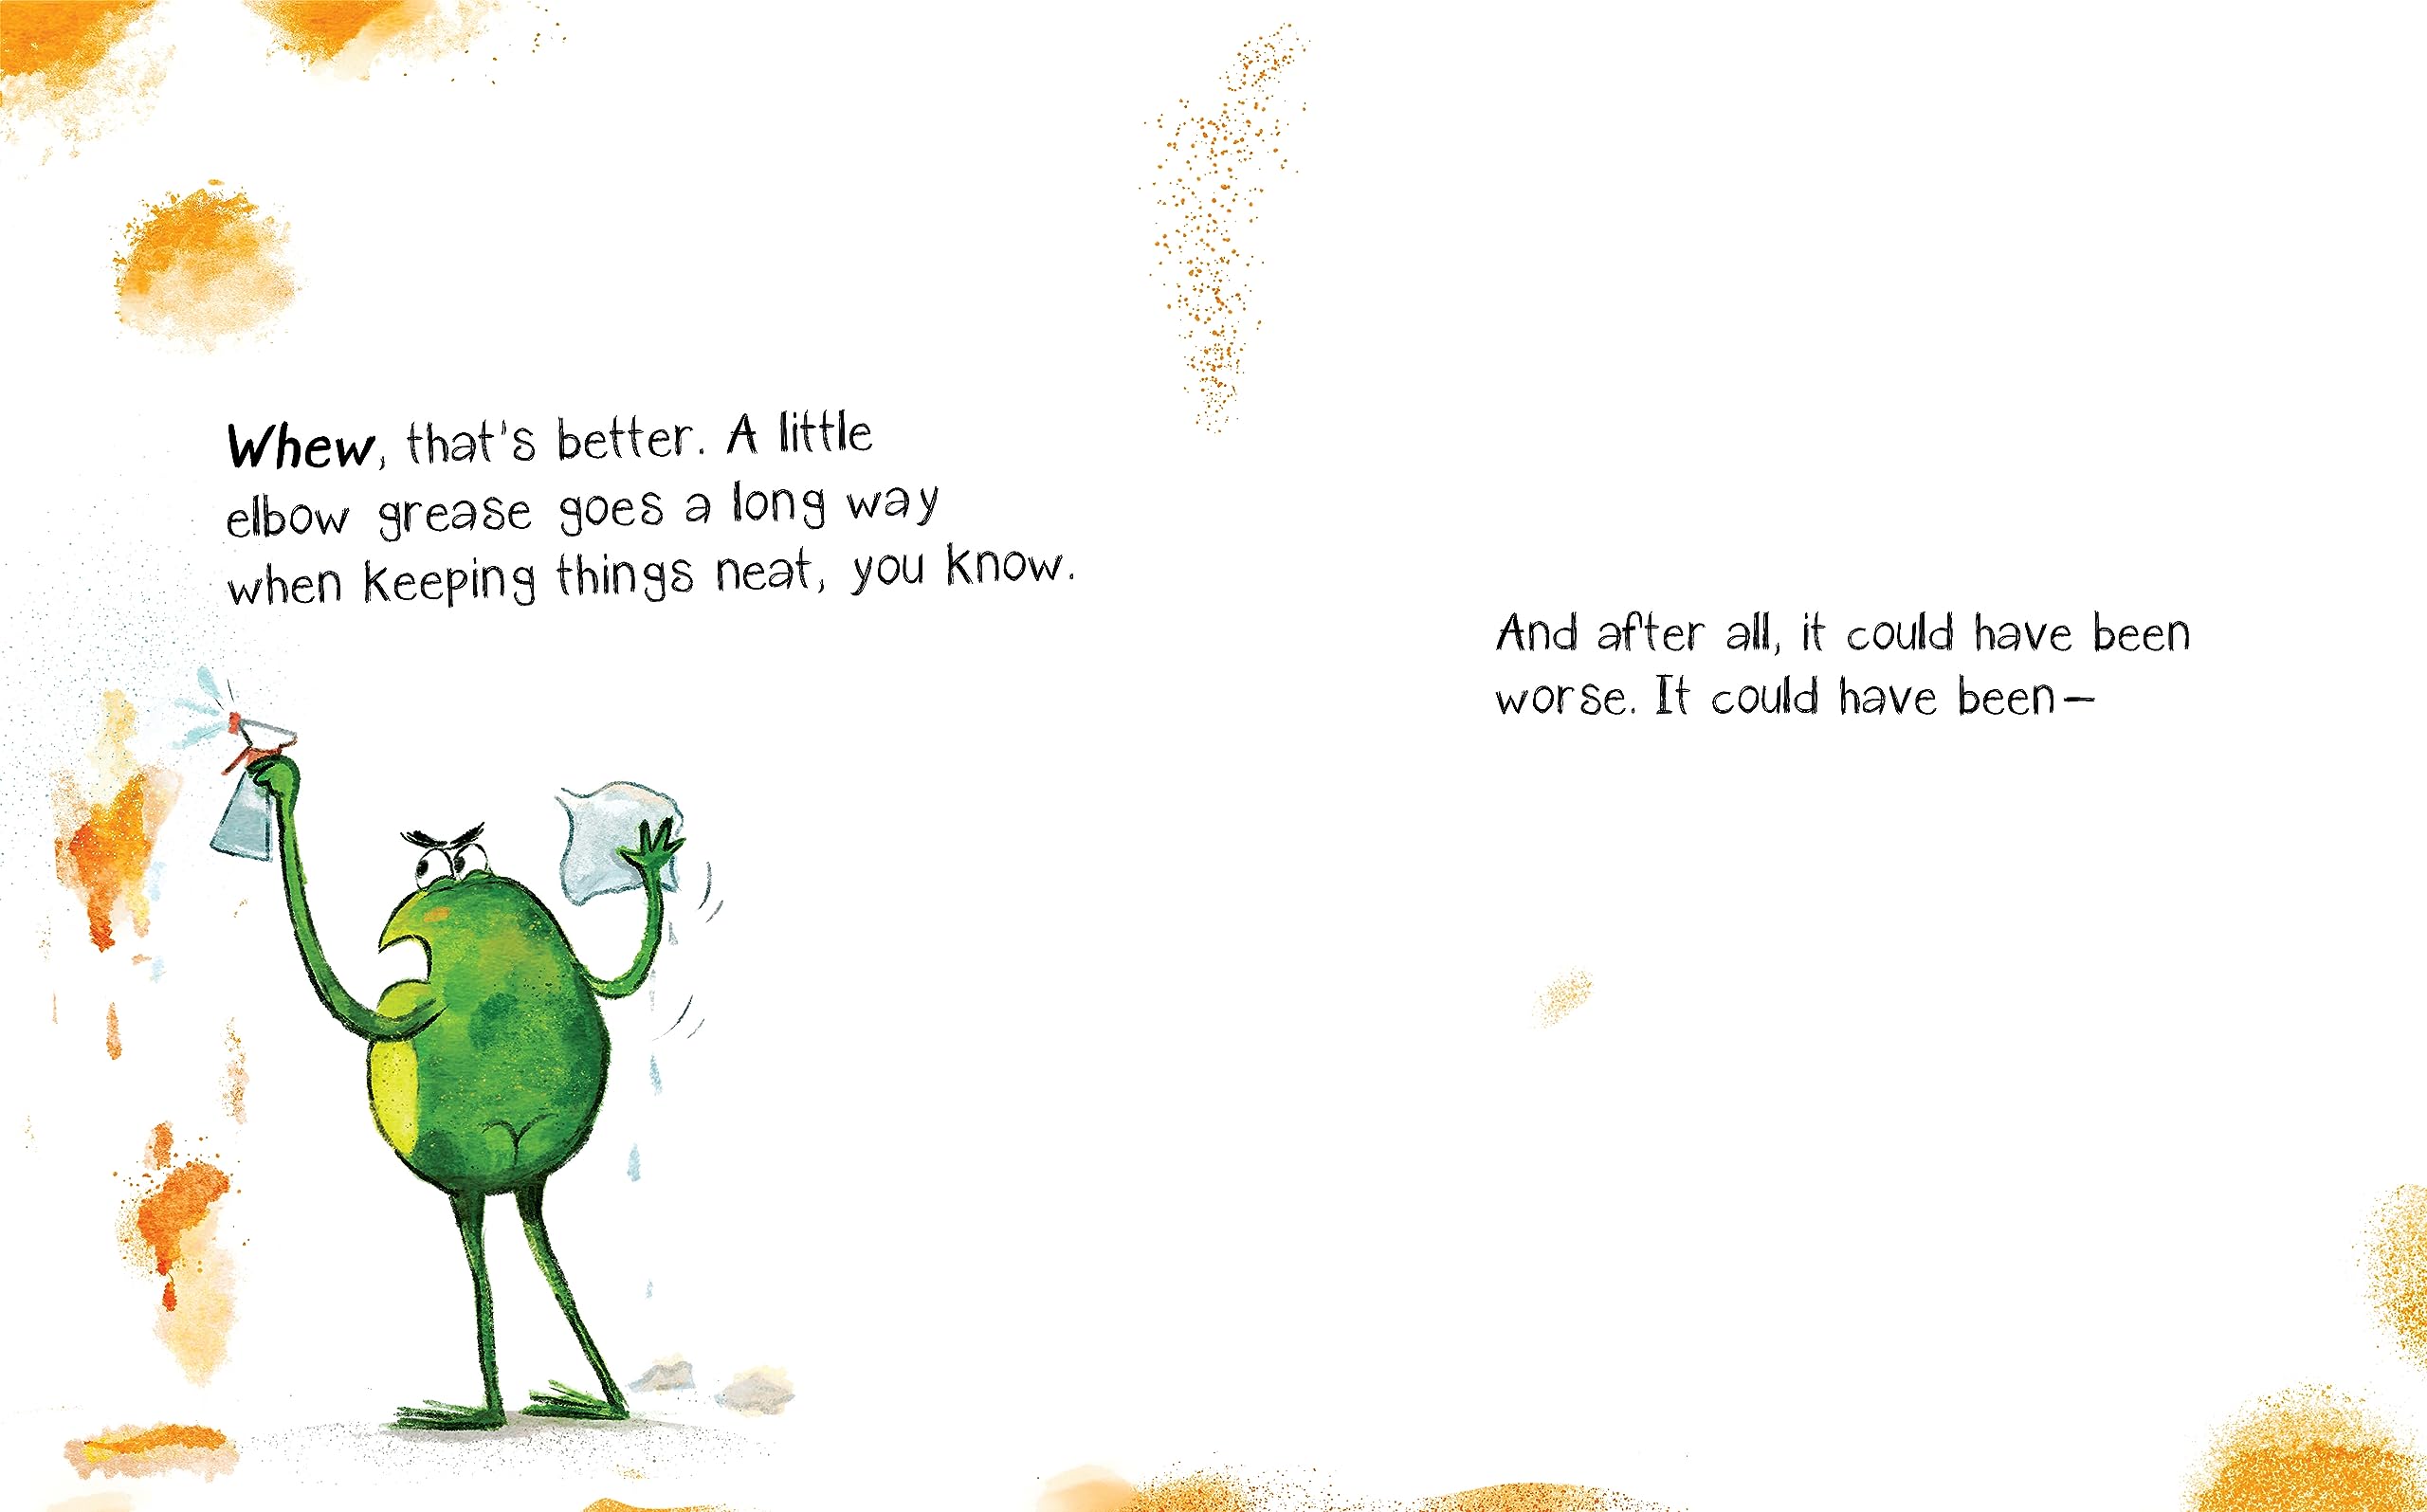 This Book Is Perfect!: A Funny And Interactive Story For Kids